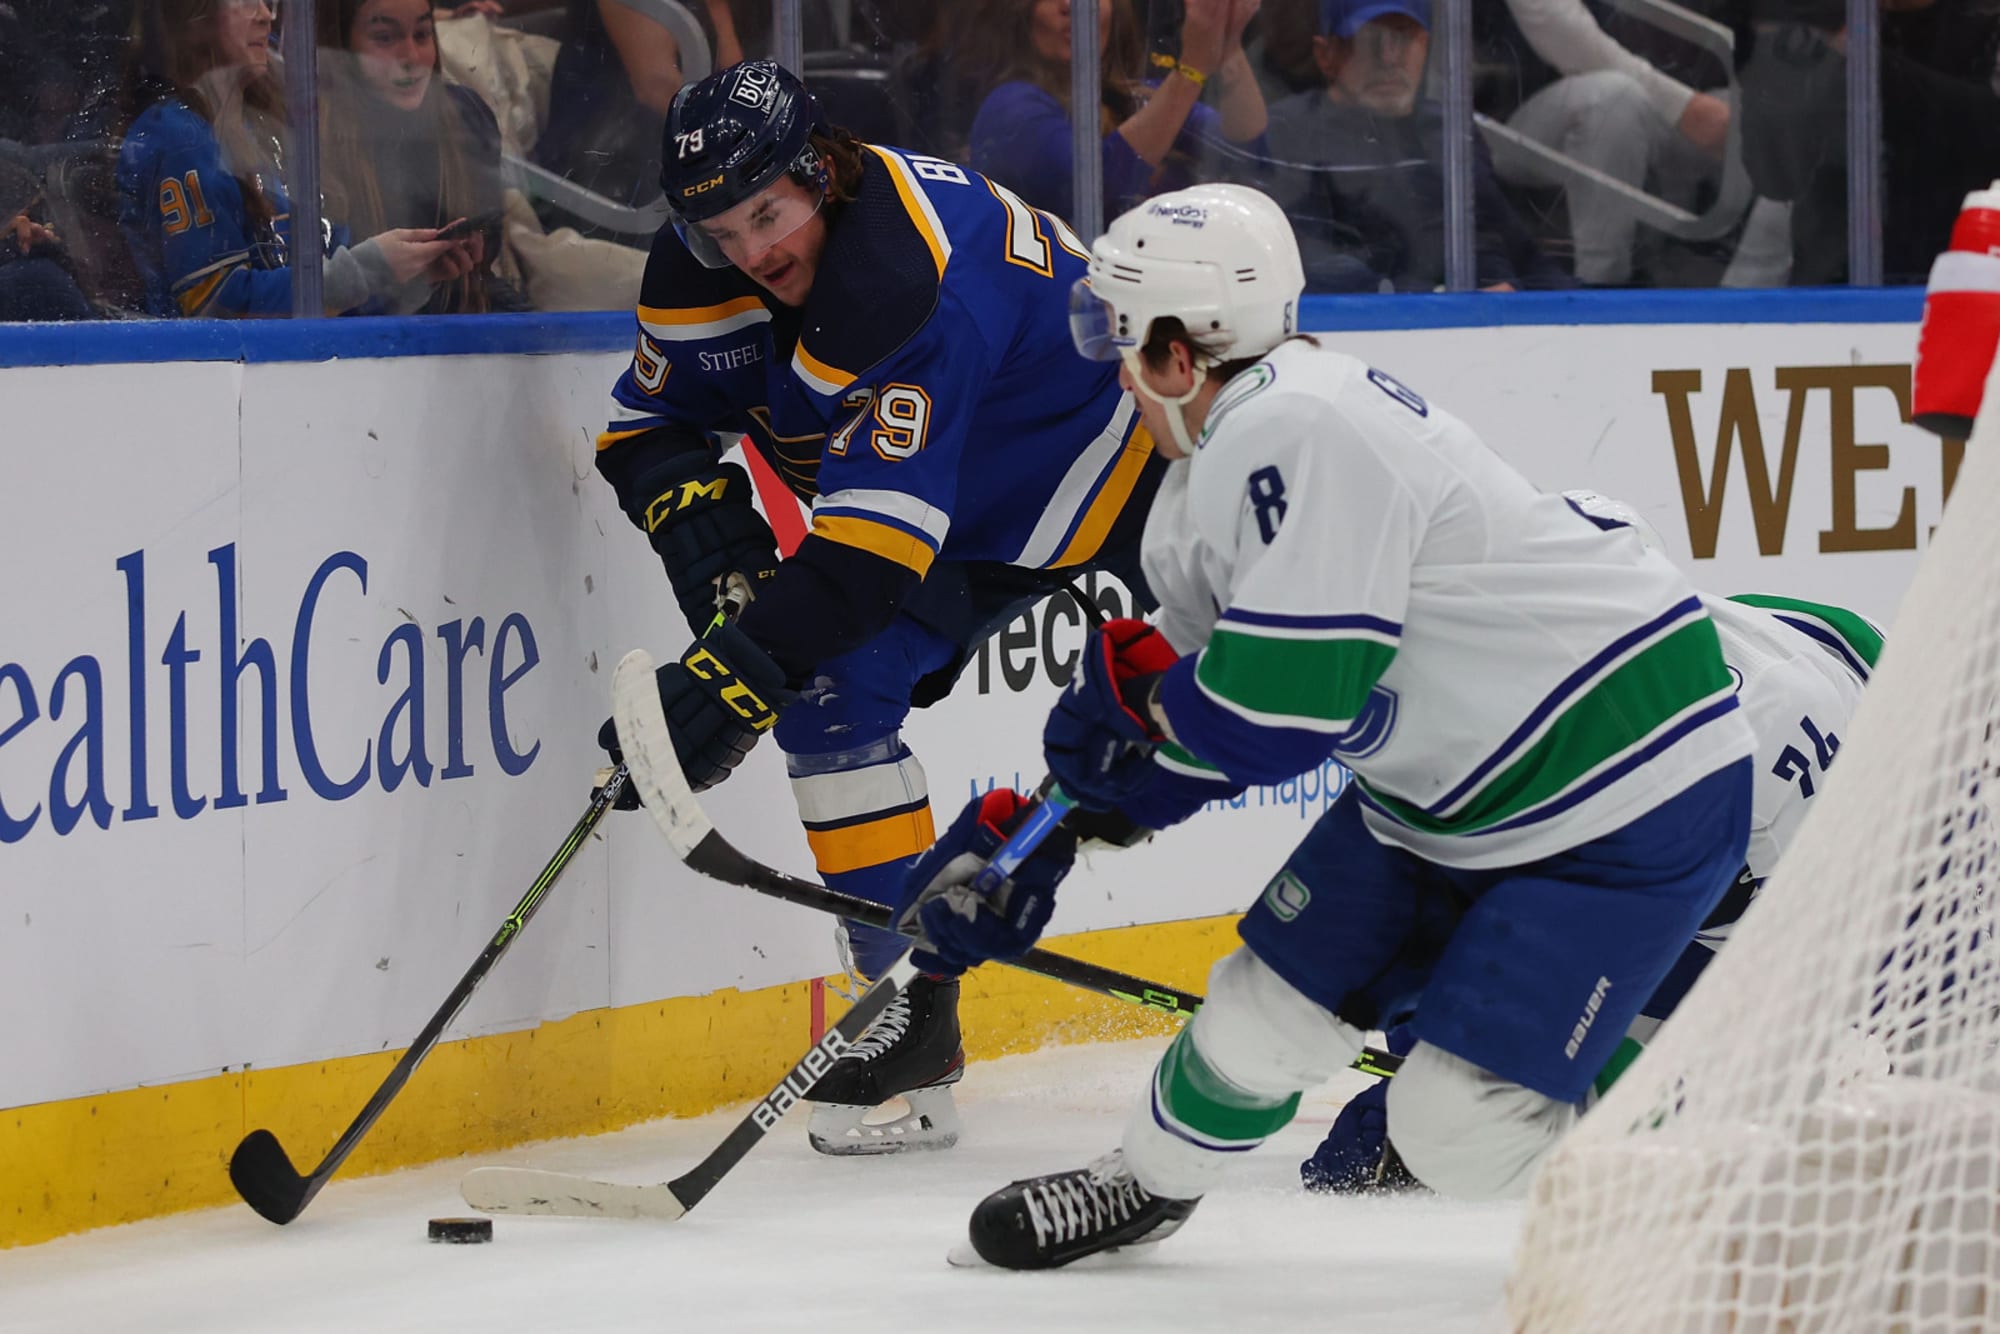 St Louis Blues Rumors: 3 Players Who Could Be Traded Next - NHL